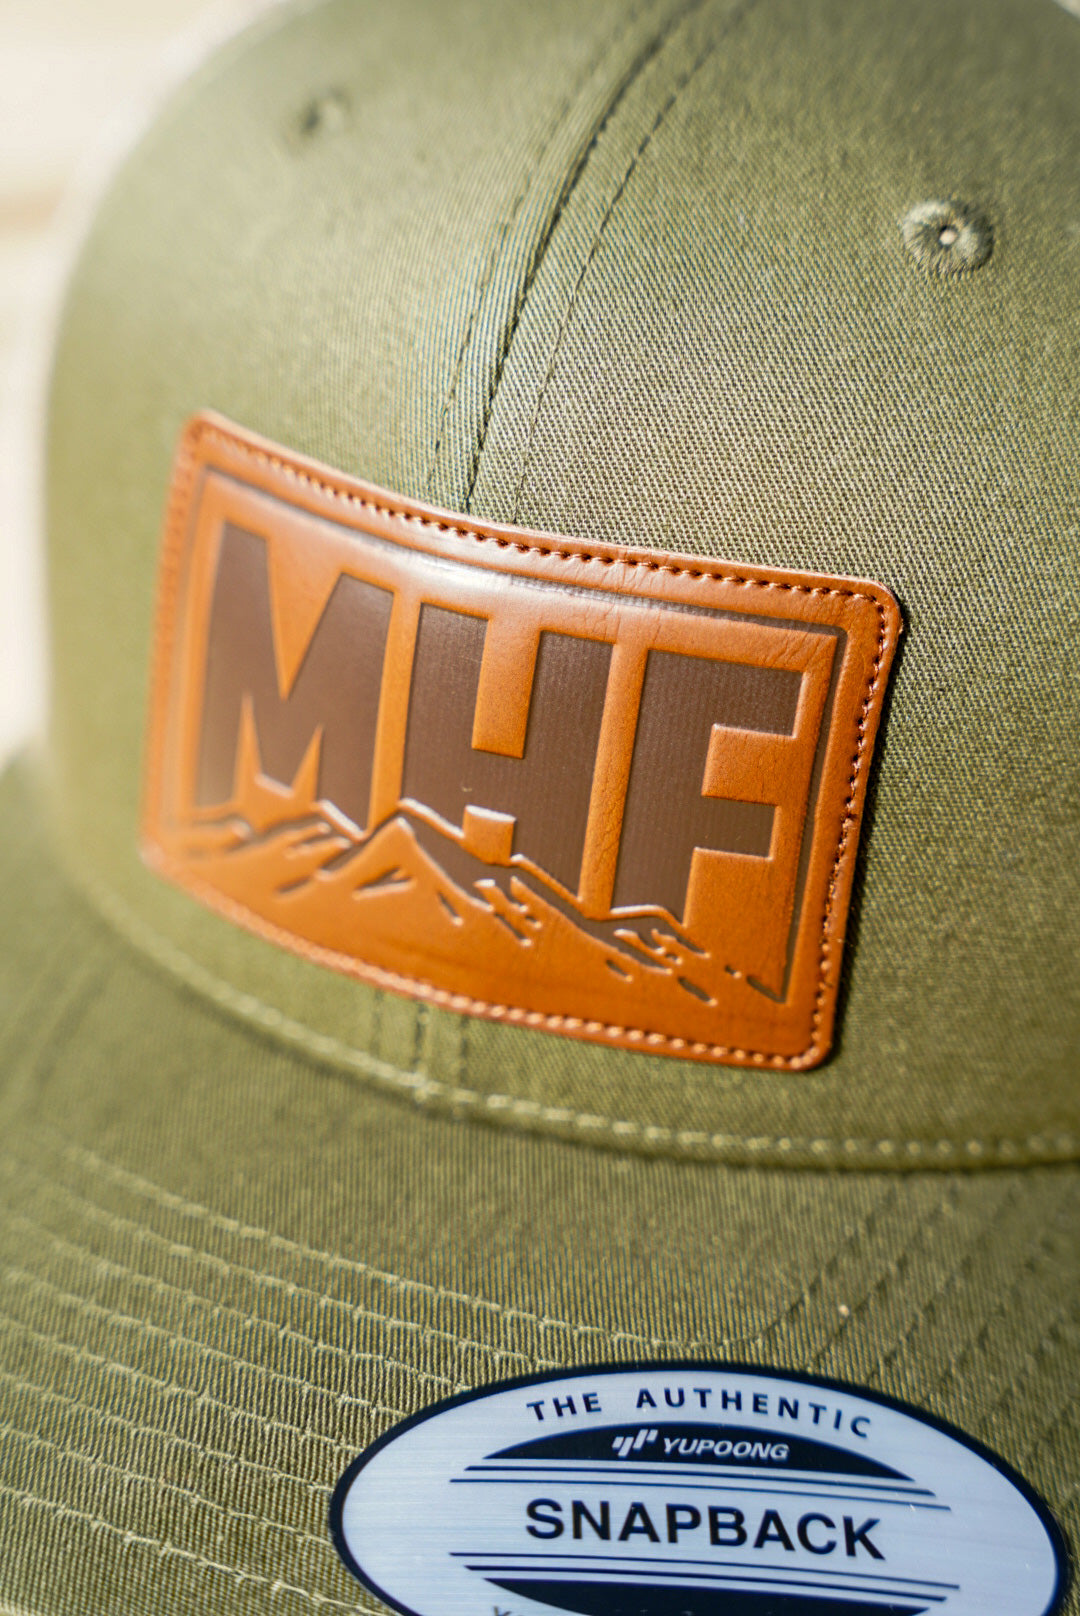 MHF Leather Patch Cap - Khaki & Cream -  - Mansfield Hunting & Fishing - Products to prepare for Corona Virus